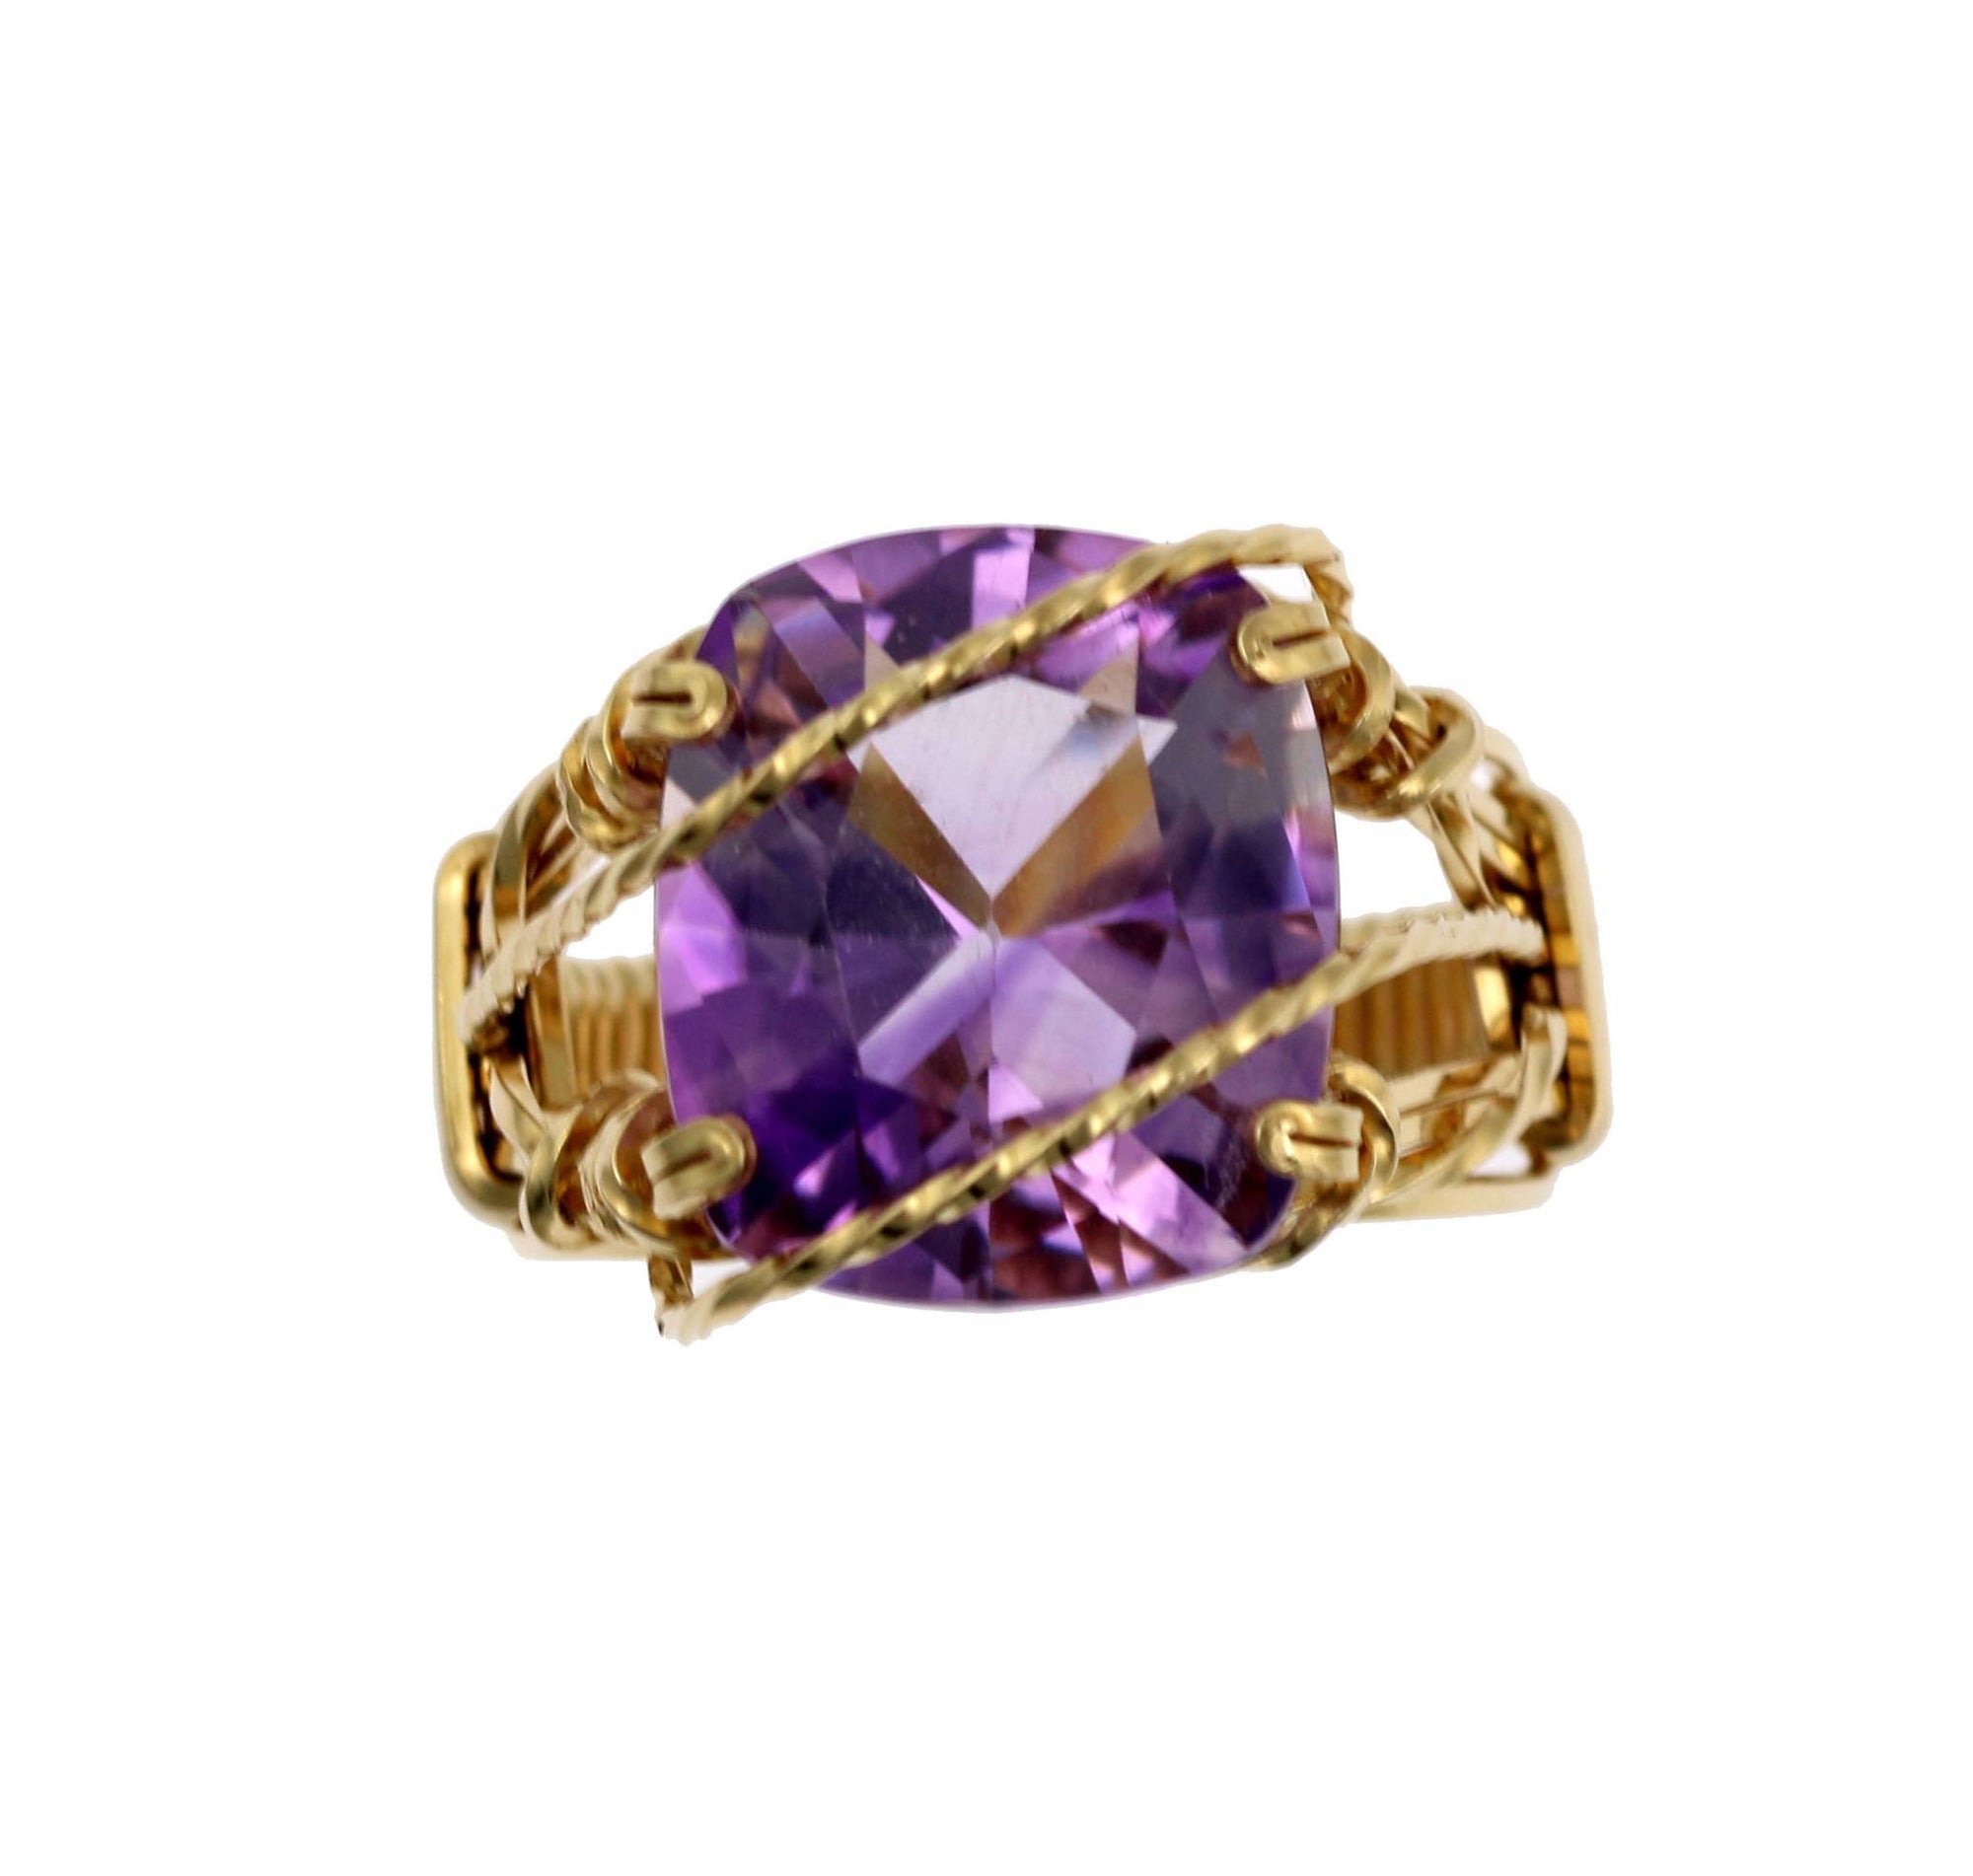 Top View of Amethyst 14K Gold-filled Cocktail Ring